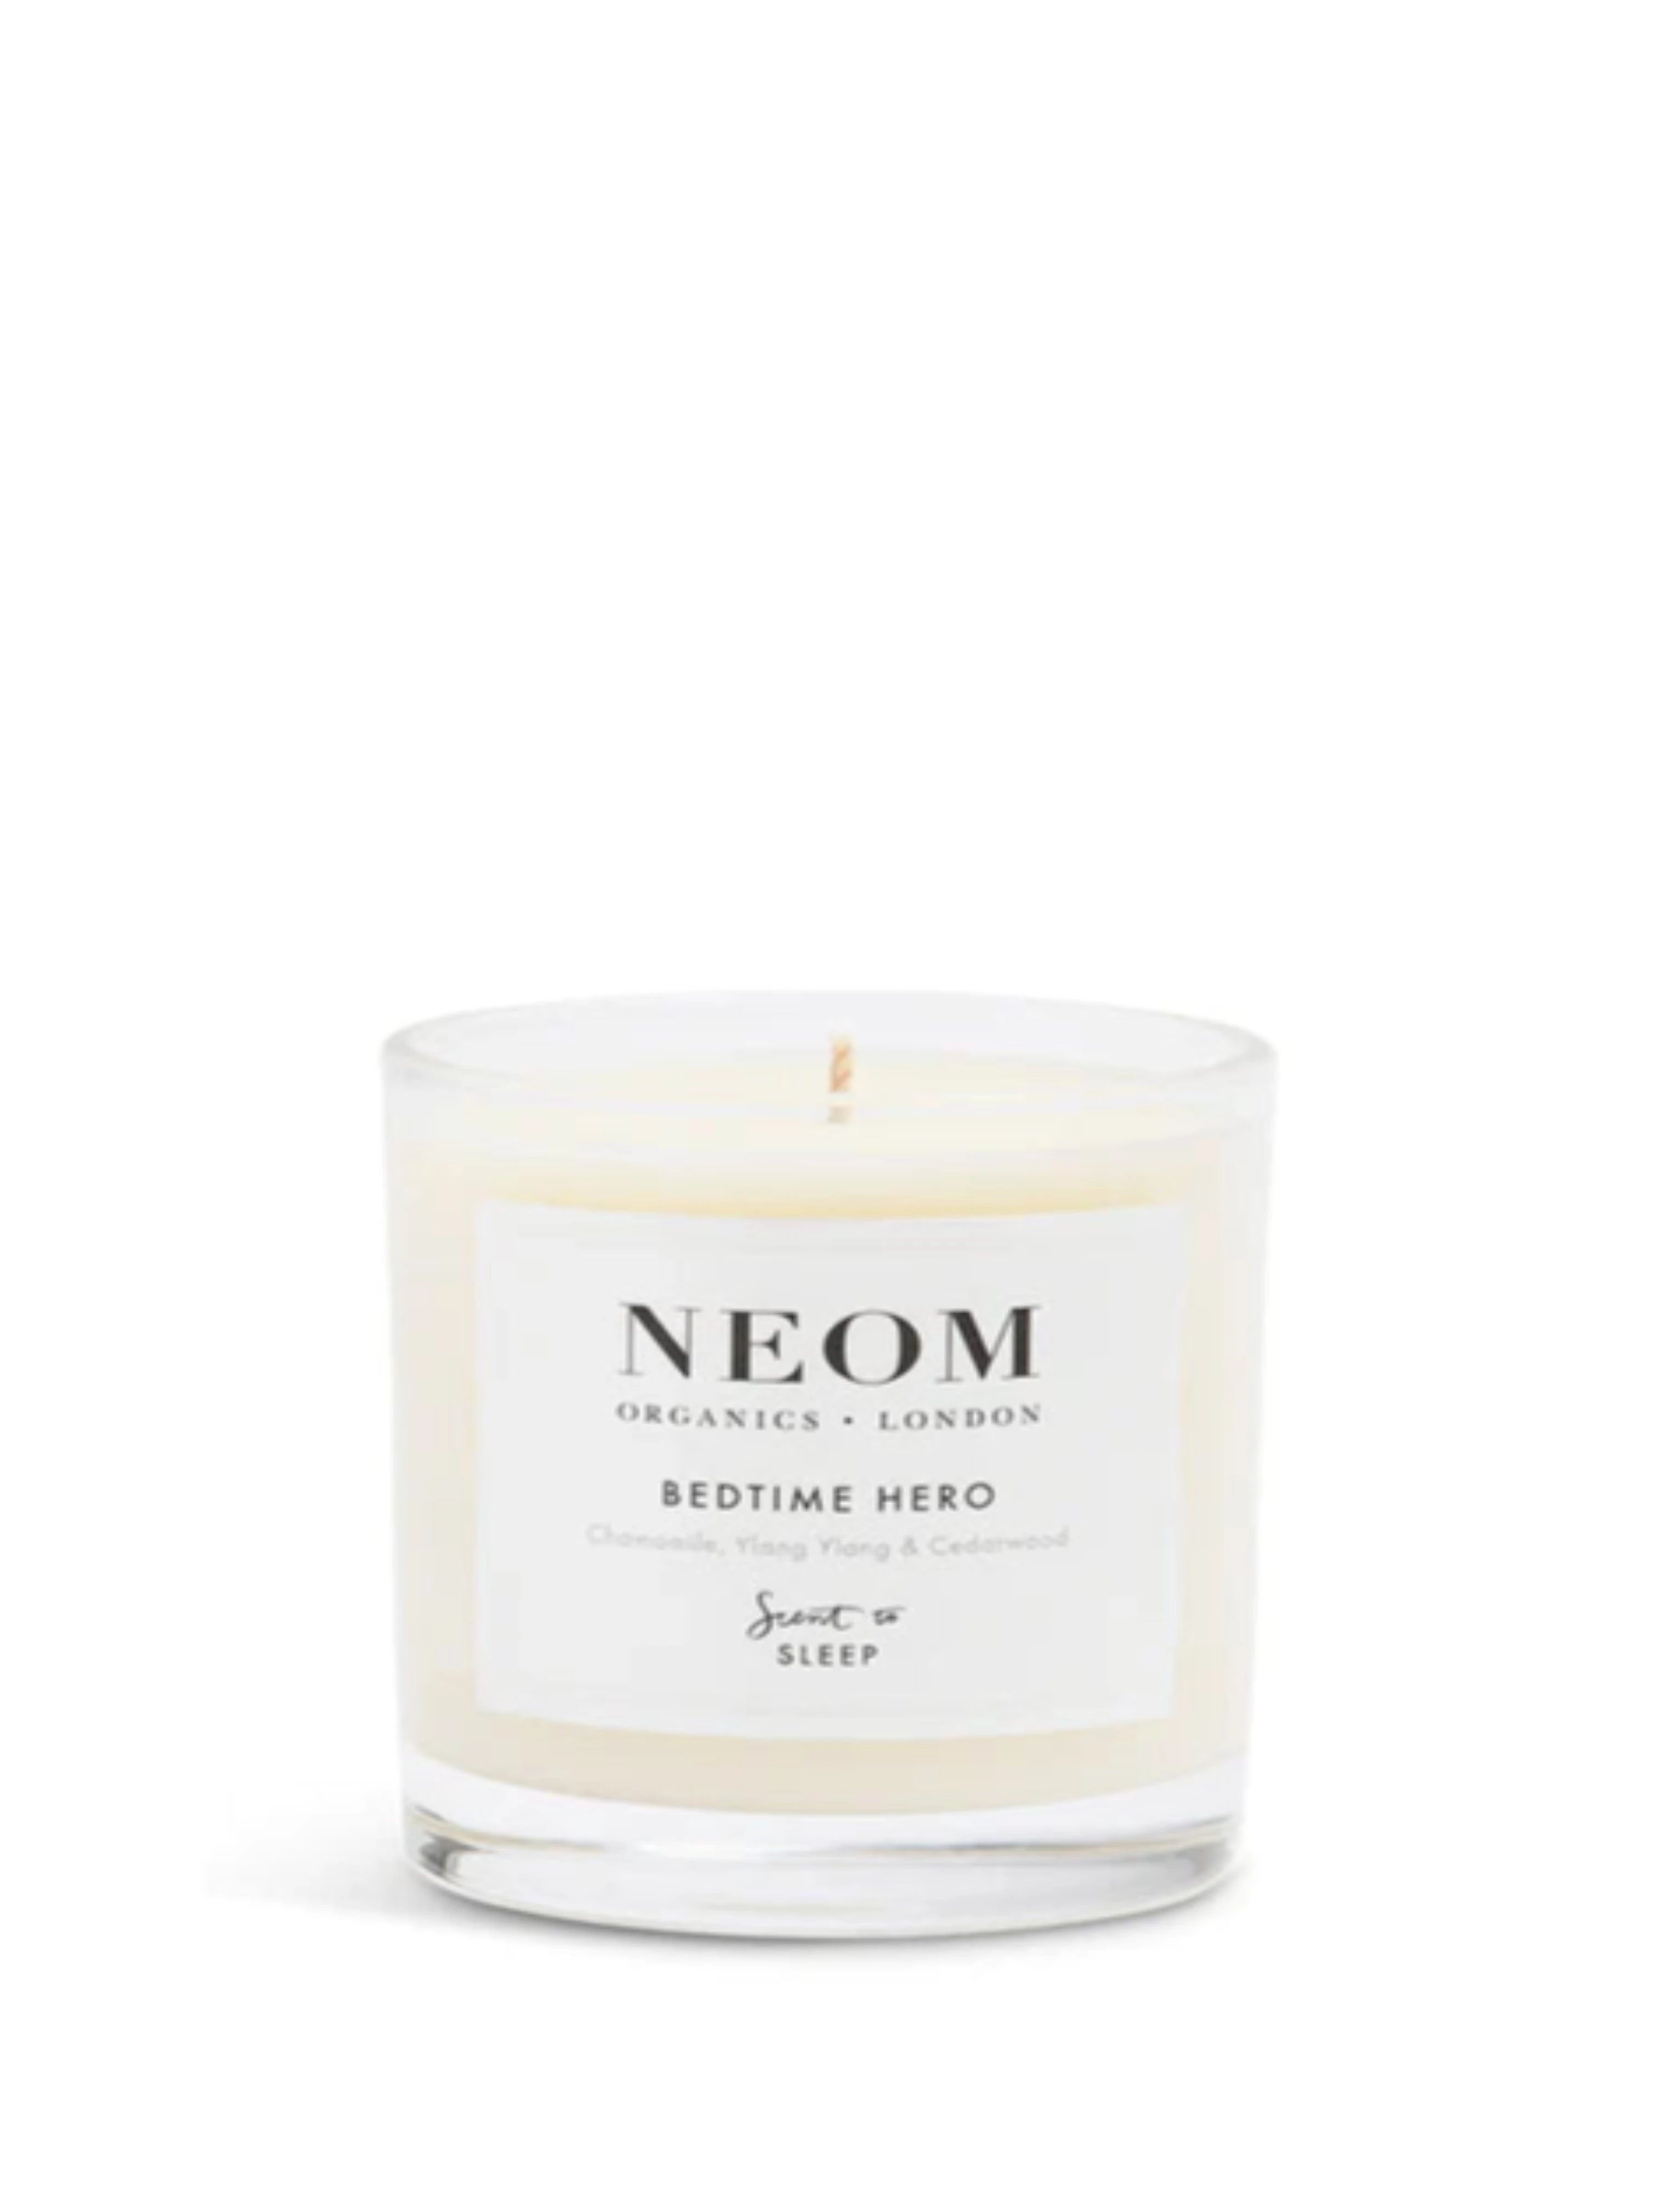 NEOM Bedtime Hero Scented 1 Wick Candle